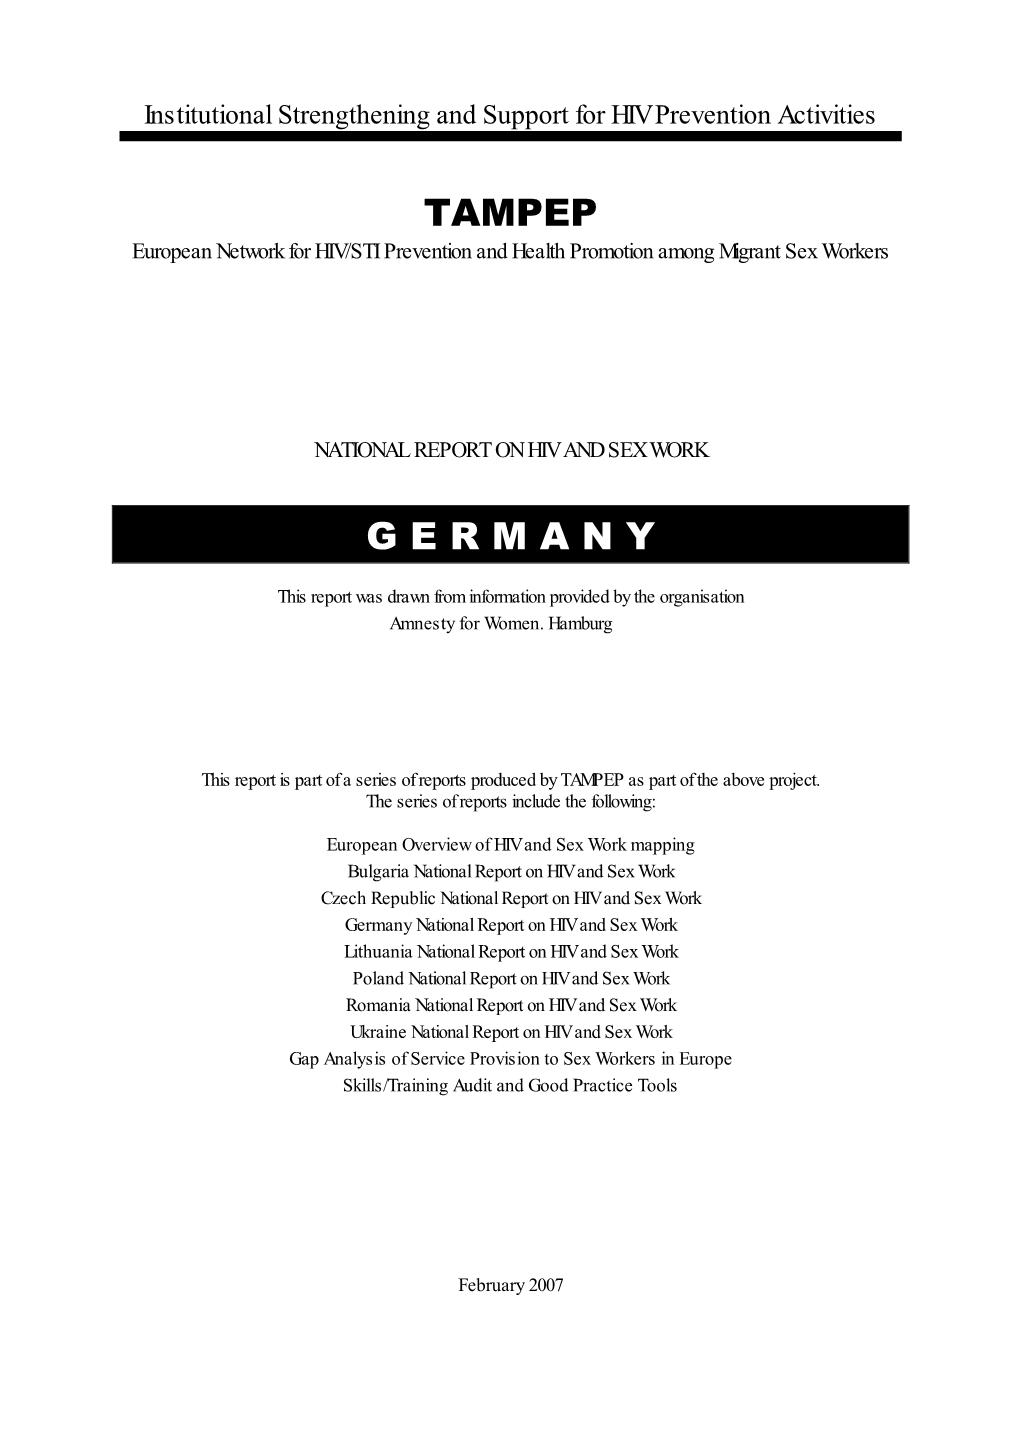 2007: Germany National Report on HIV and Sex Work